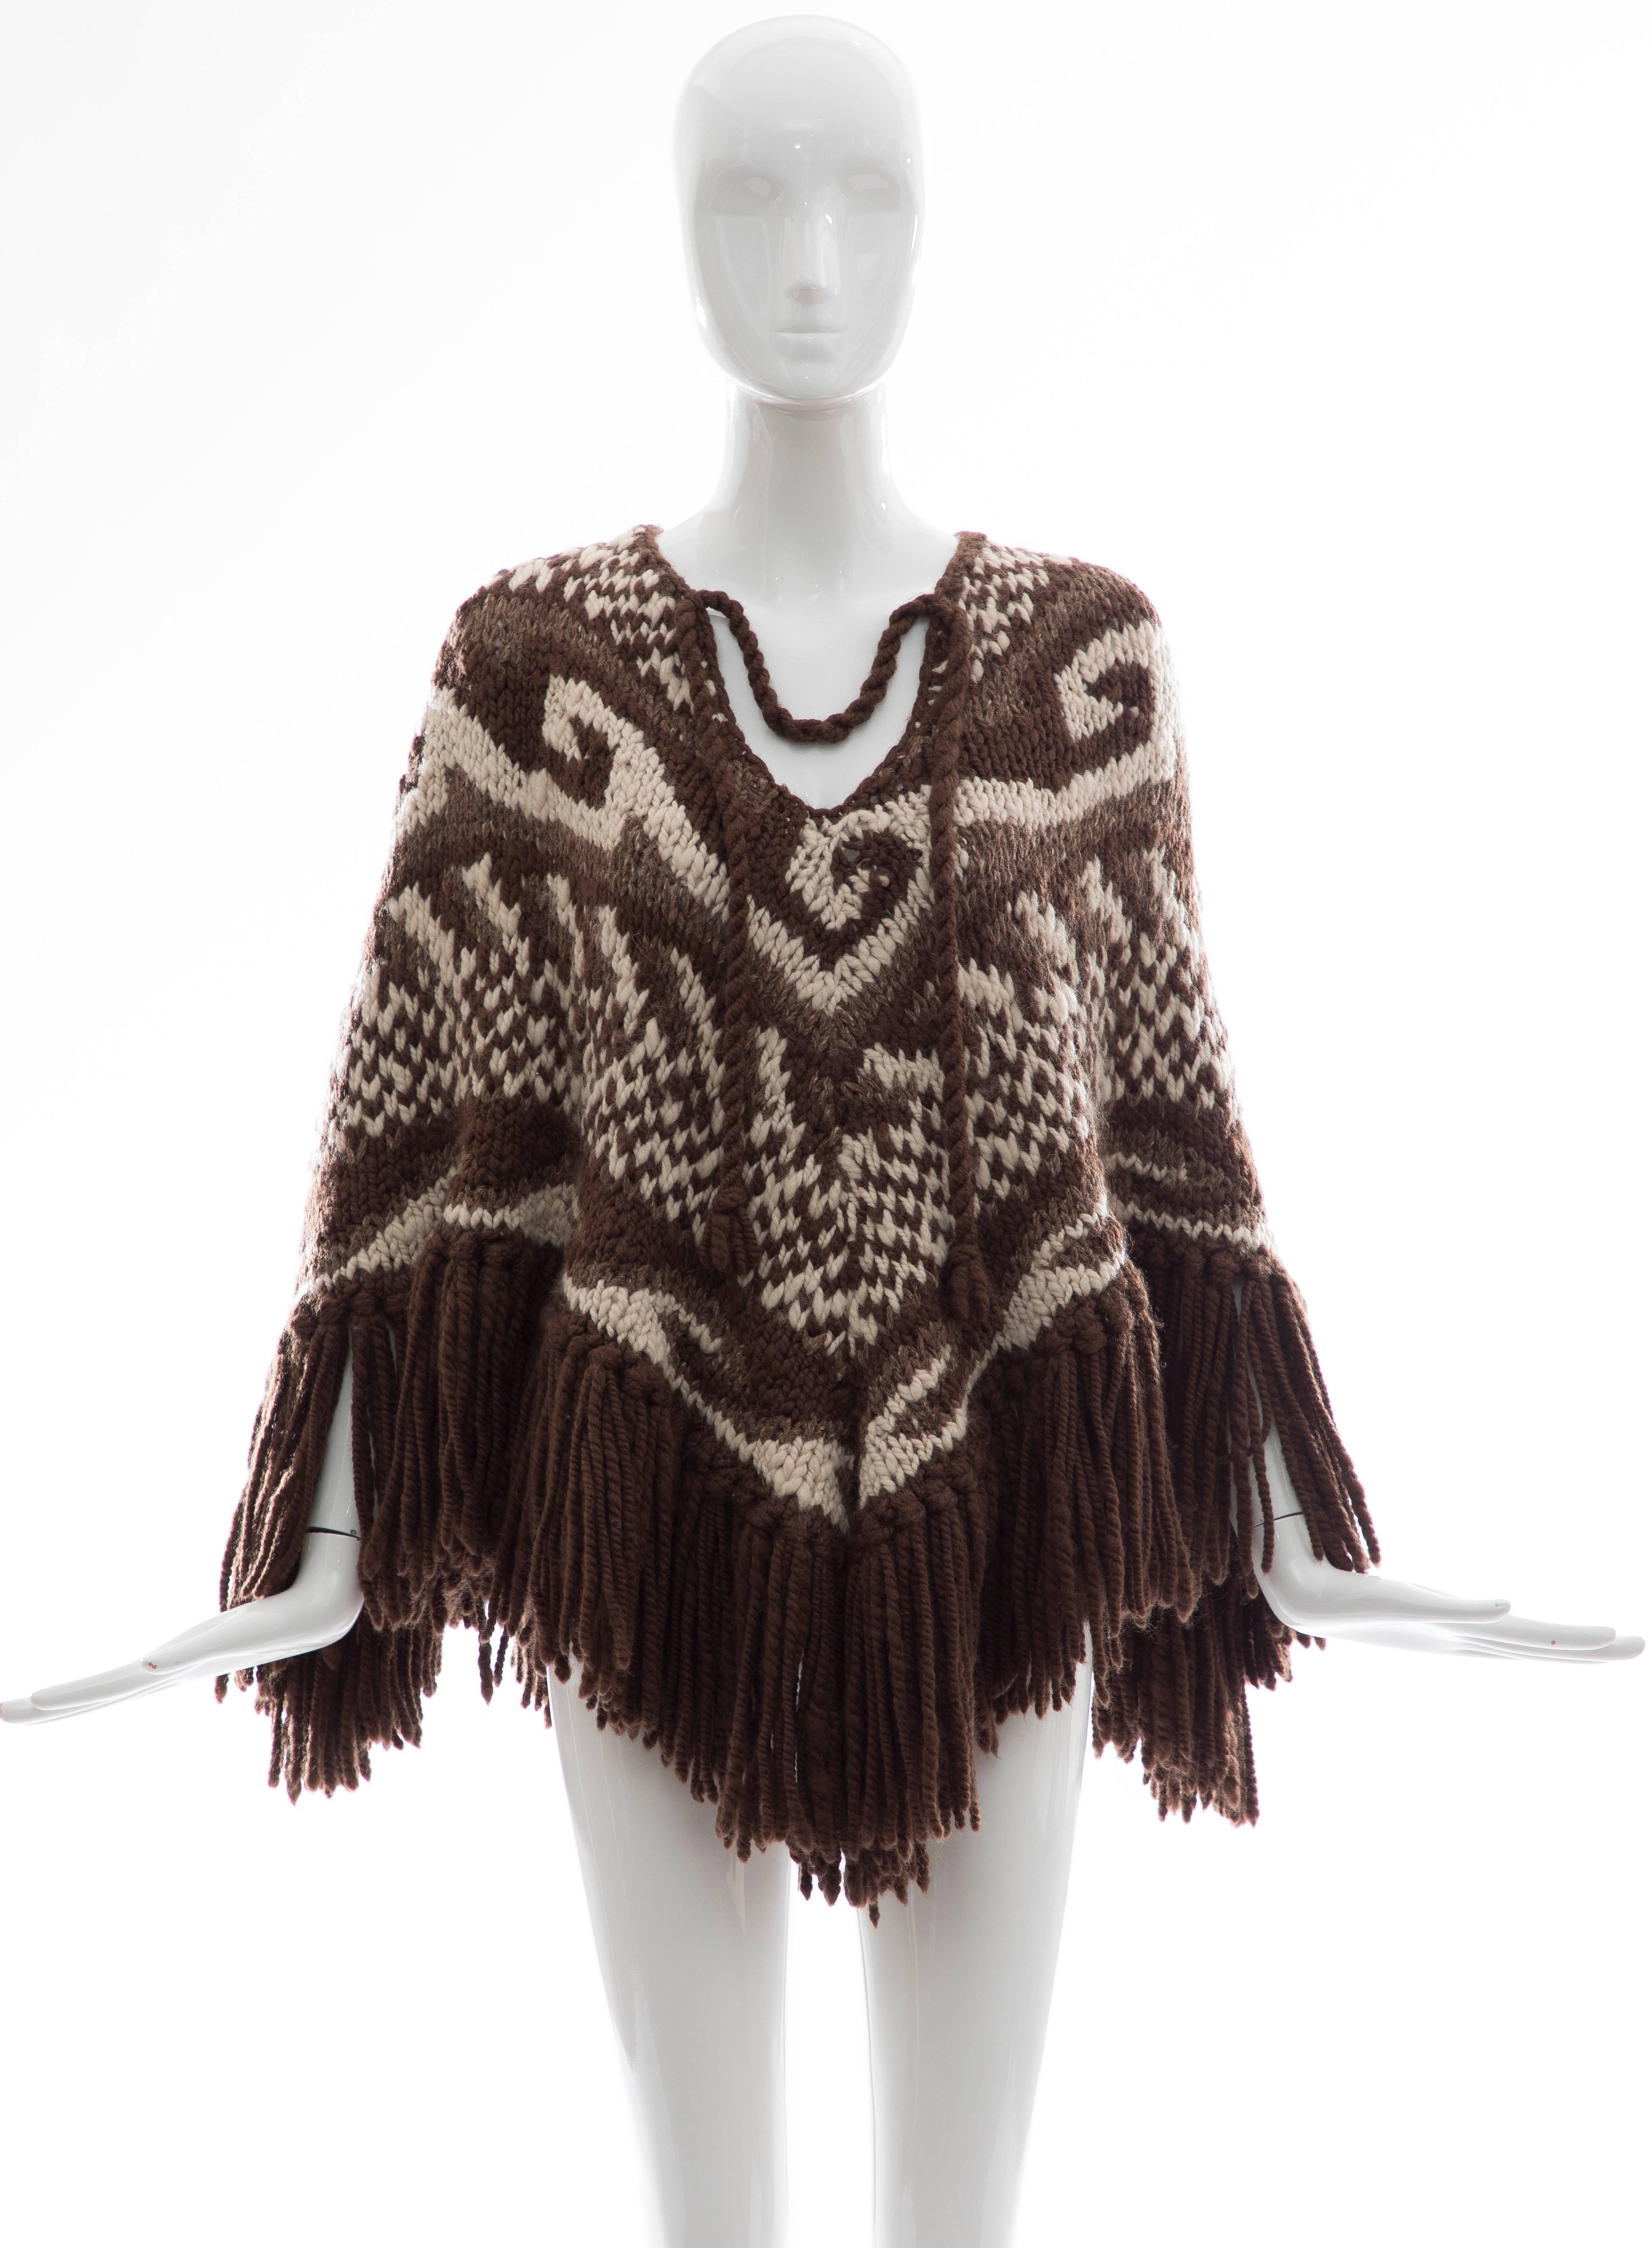 Dolce and Gabbana, Fall 2002, Runway(Look 37) wool alpaca knit poncho.

IT. Small

Bust 64, Shoulder 42, Length 29